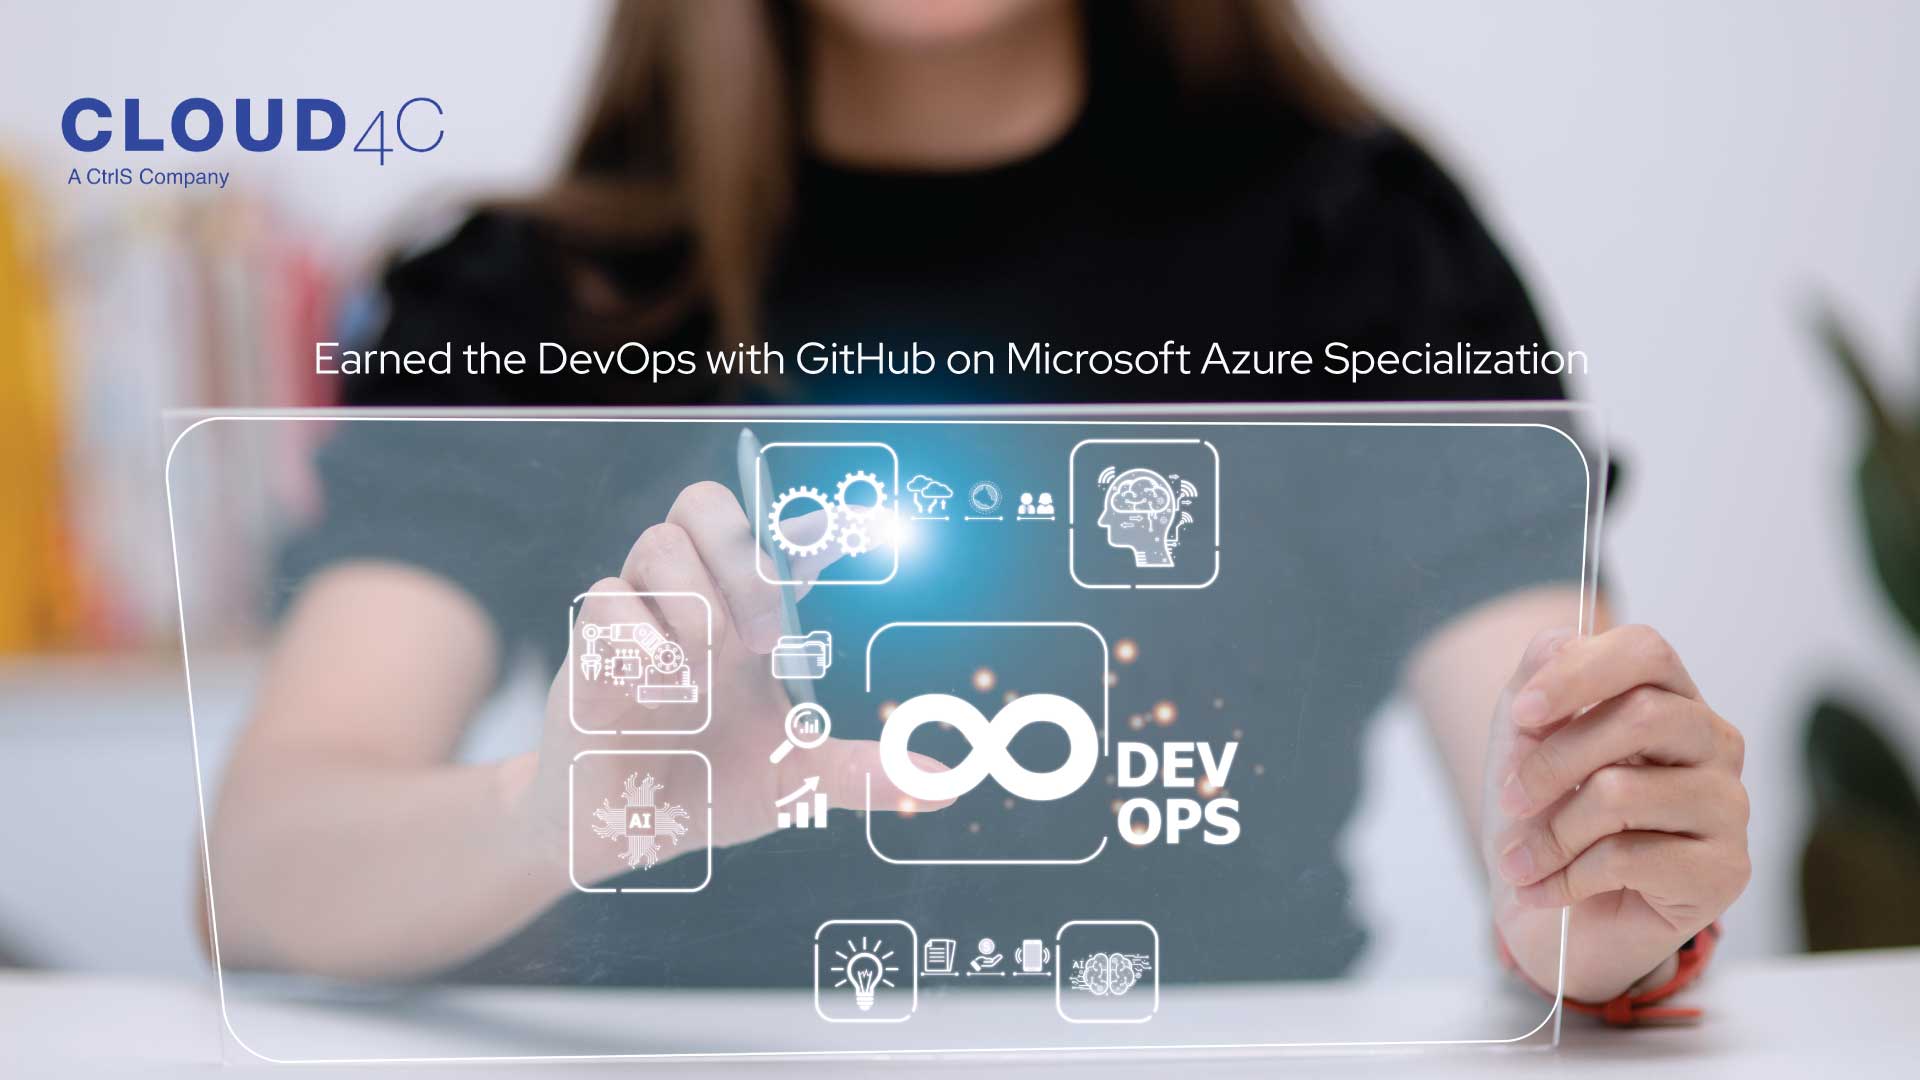 Cloud4C Has Earned the DevOps with GitHub on Microsoft Azure Specialization